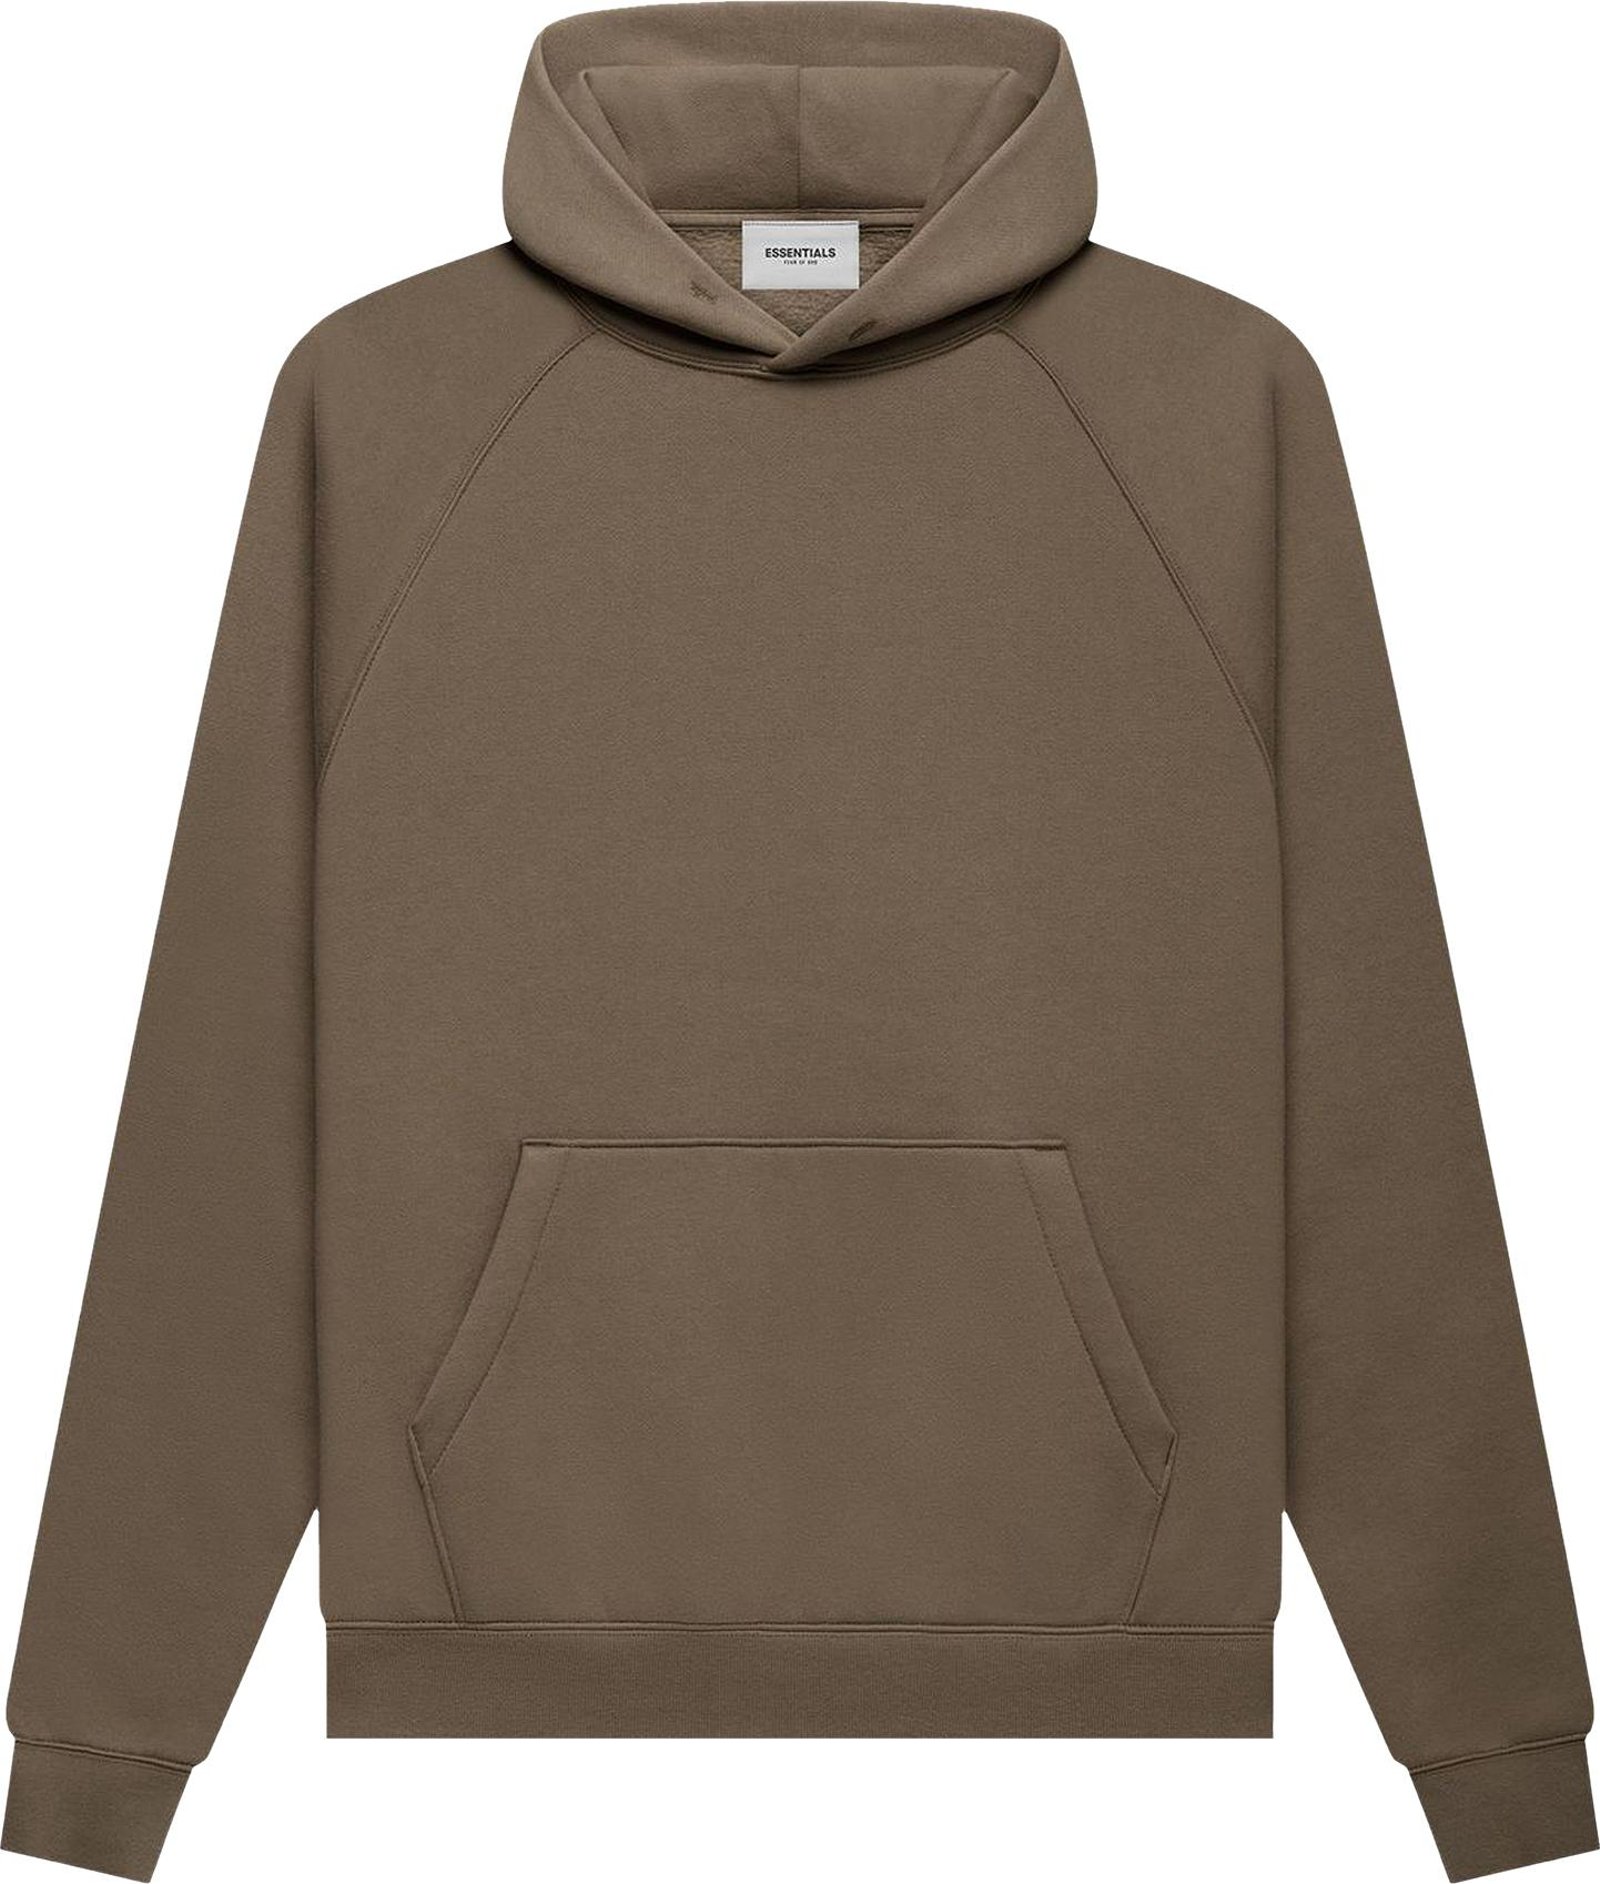 Buy Fear of God Essentials Pullover Hoodie 'Harvest' - 192SU212001F | GOAT